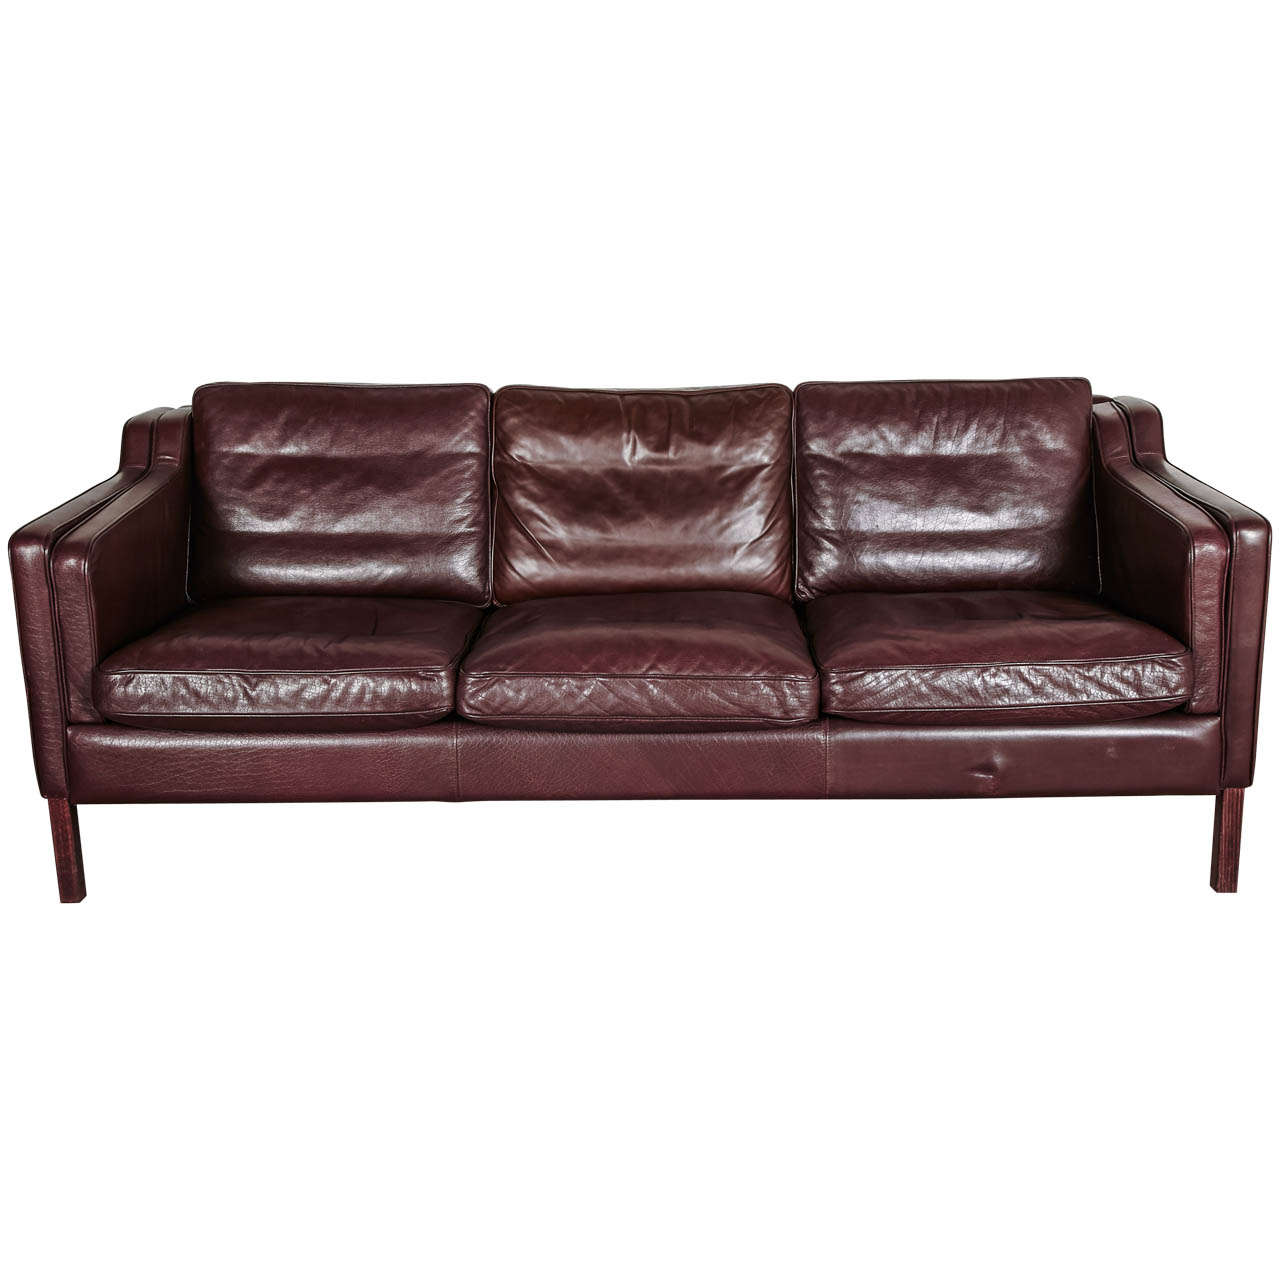 Danish Design Sofa by Borge Mogensen Editions Stouby For Sale